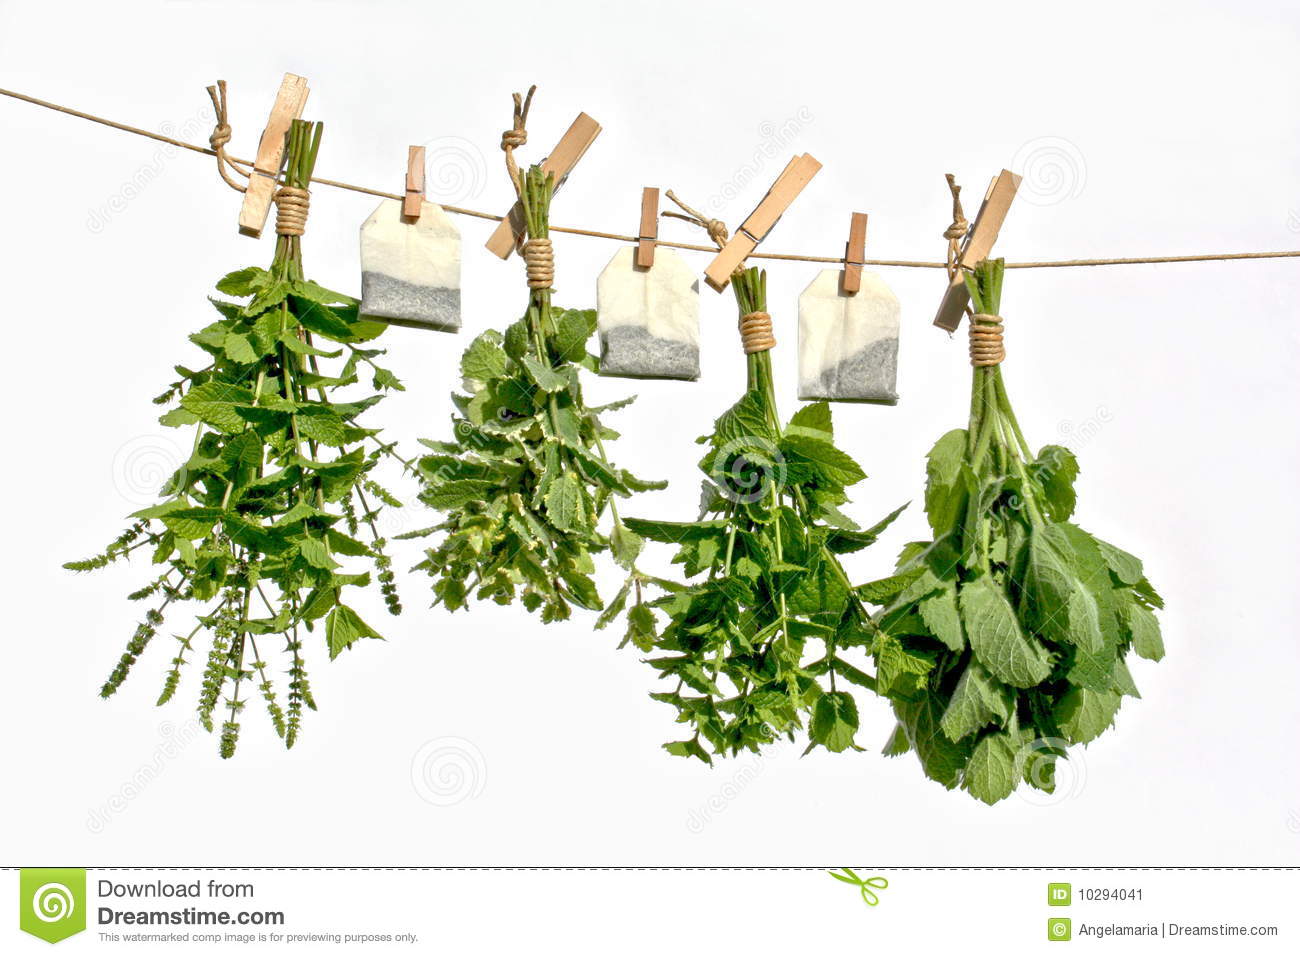 Drying Herbs Stock Image   Image  10294041